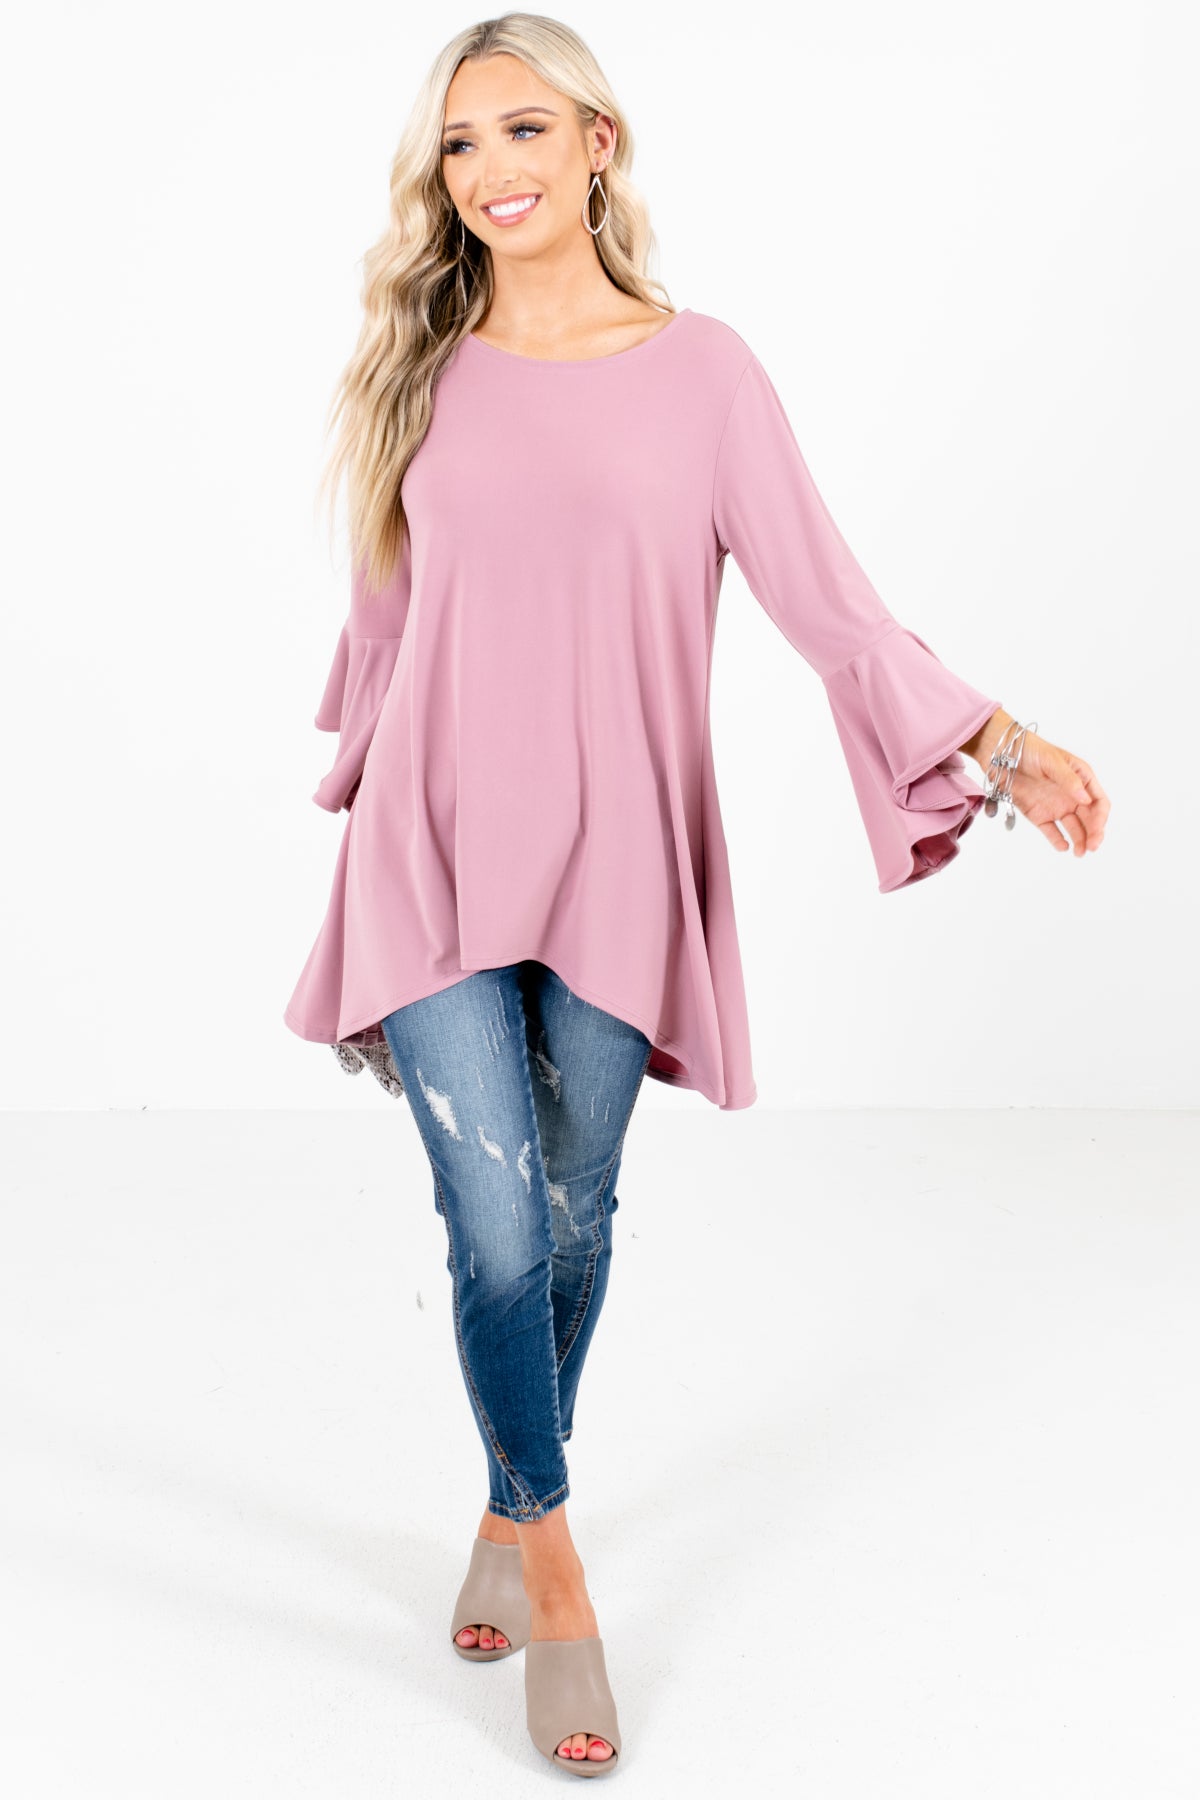 Women's Pink Business Casual Boutique Blouse